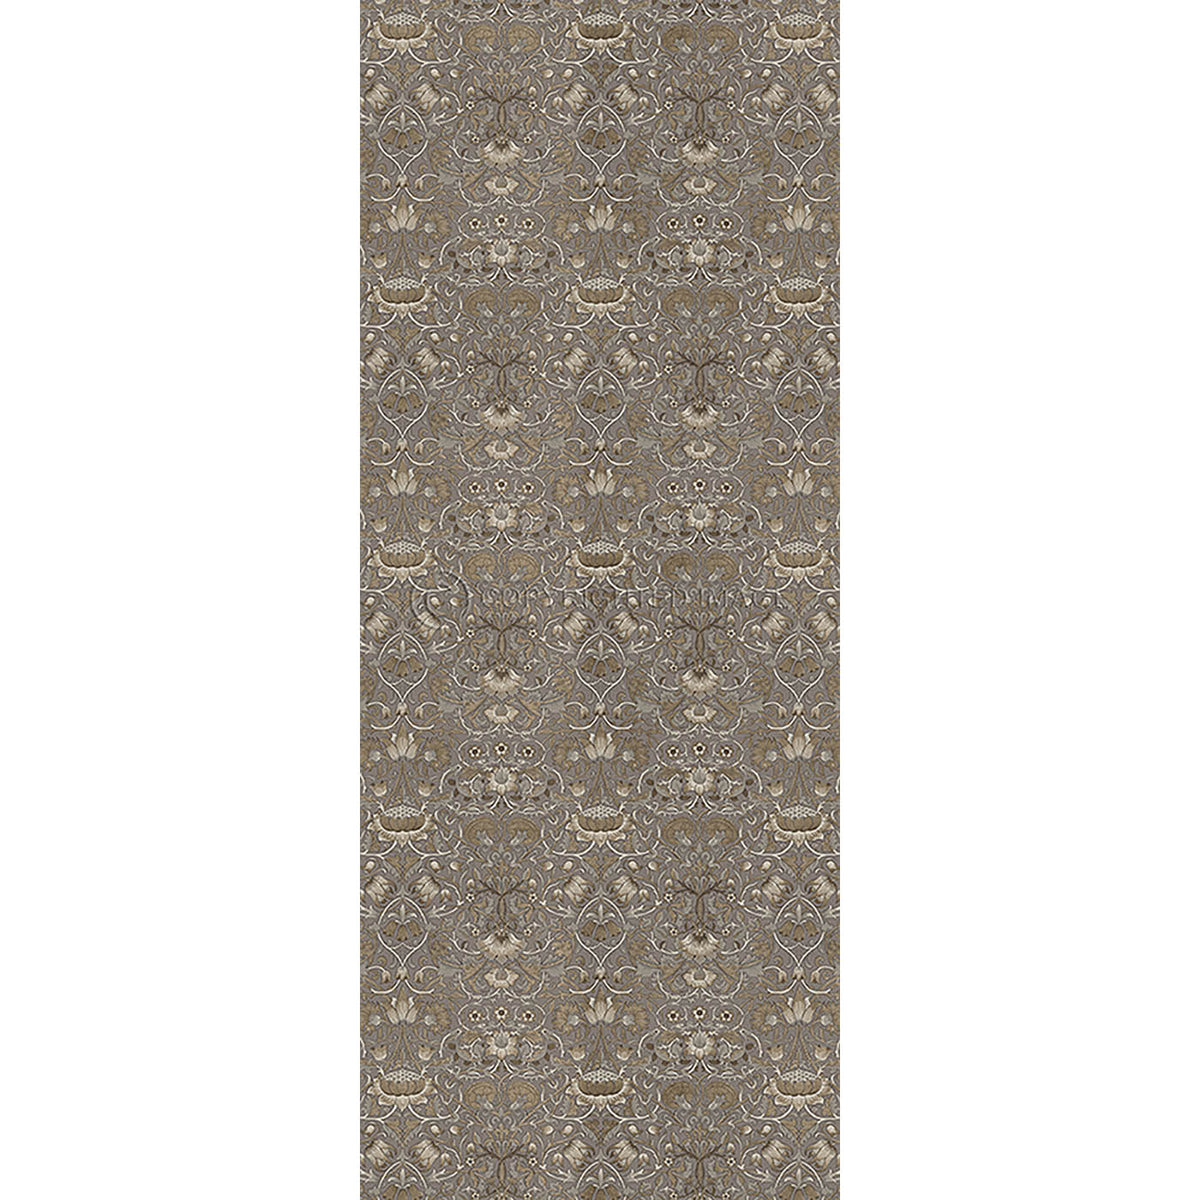 Lodden Taupe and Gold 36x90